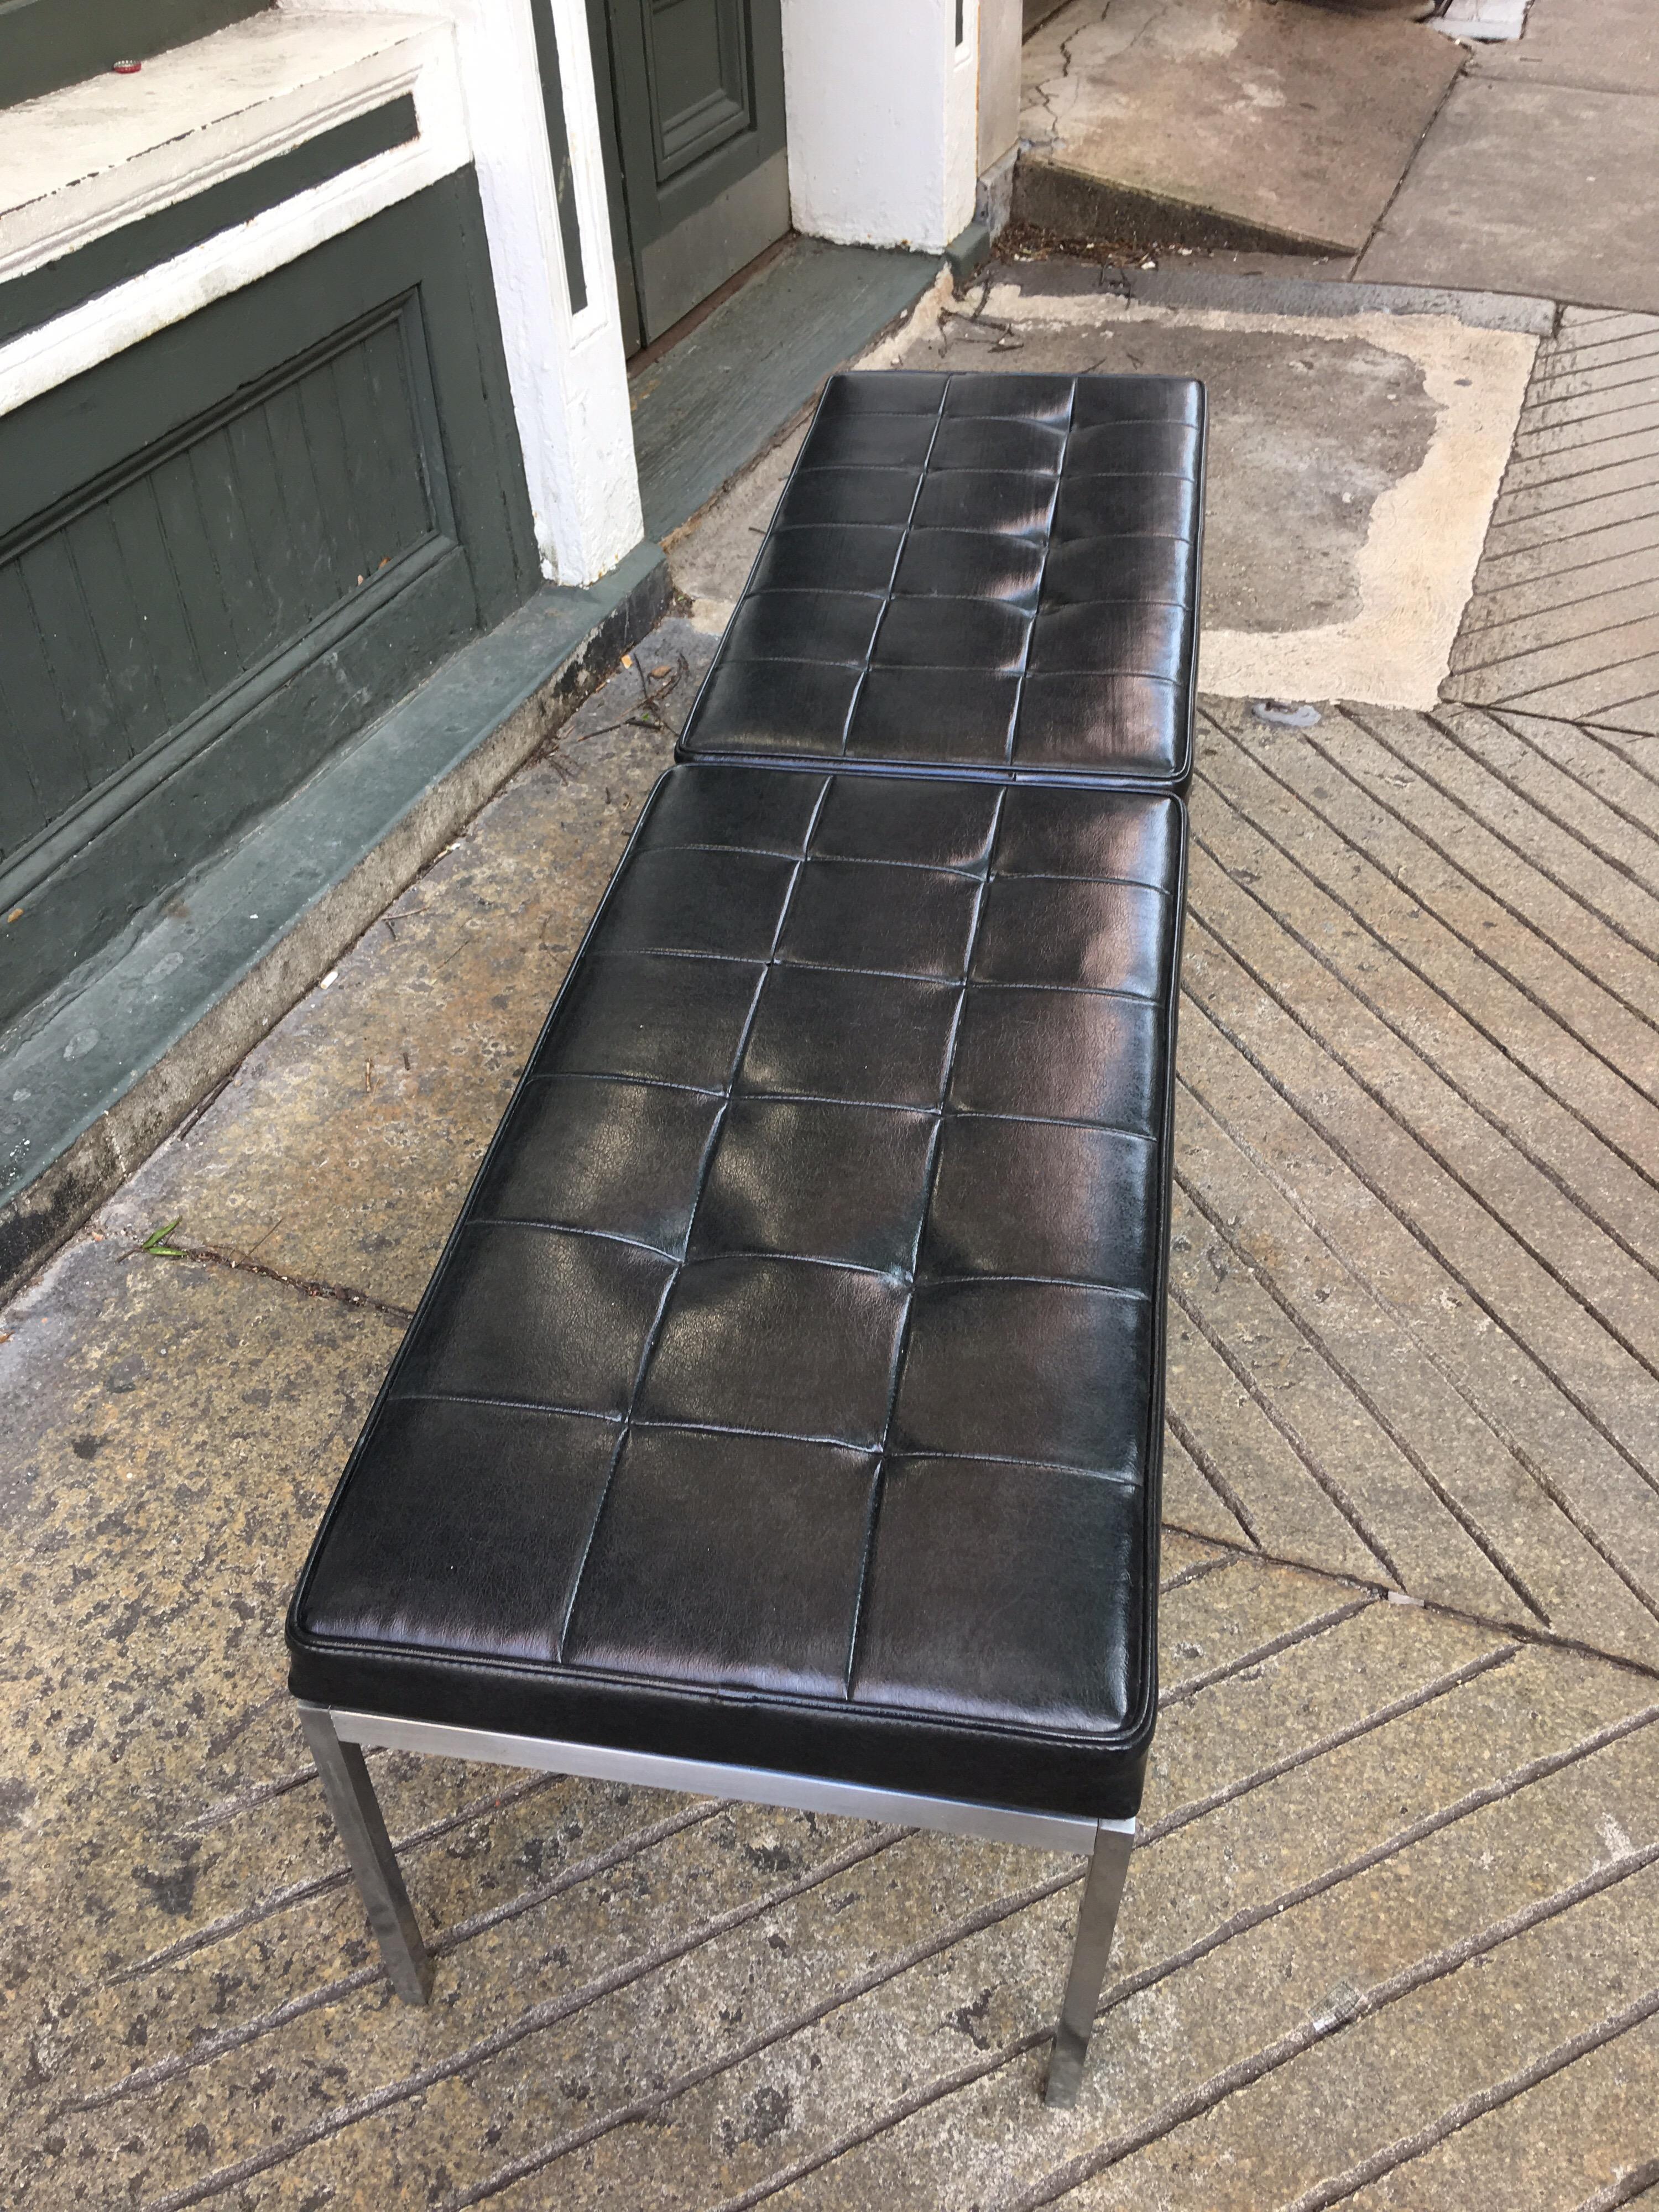 Nice early Florence Knoll bench in black vinyl. Originally from the office of a Cement Company President! Classic design with a stainless steel frame. Original vinyl seat pad shows one small tear as shown in photo.